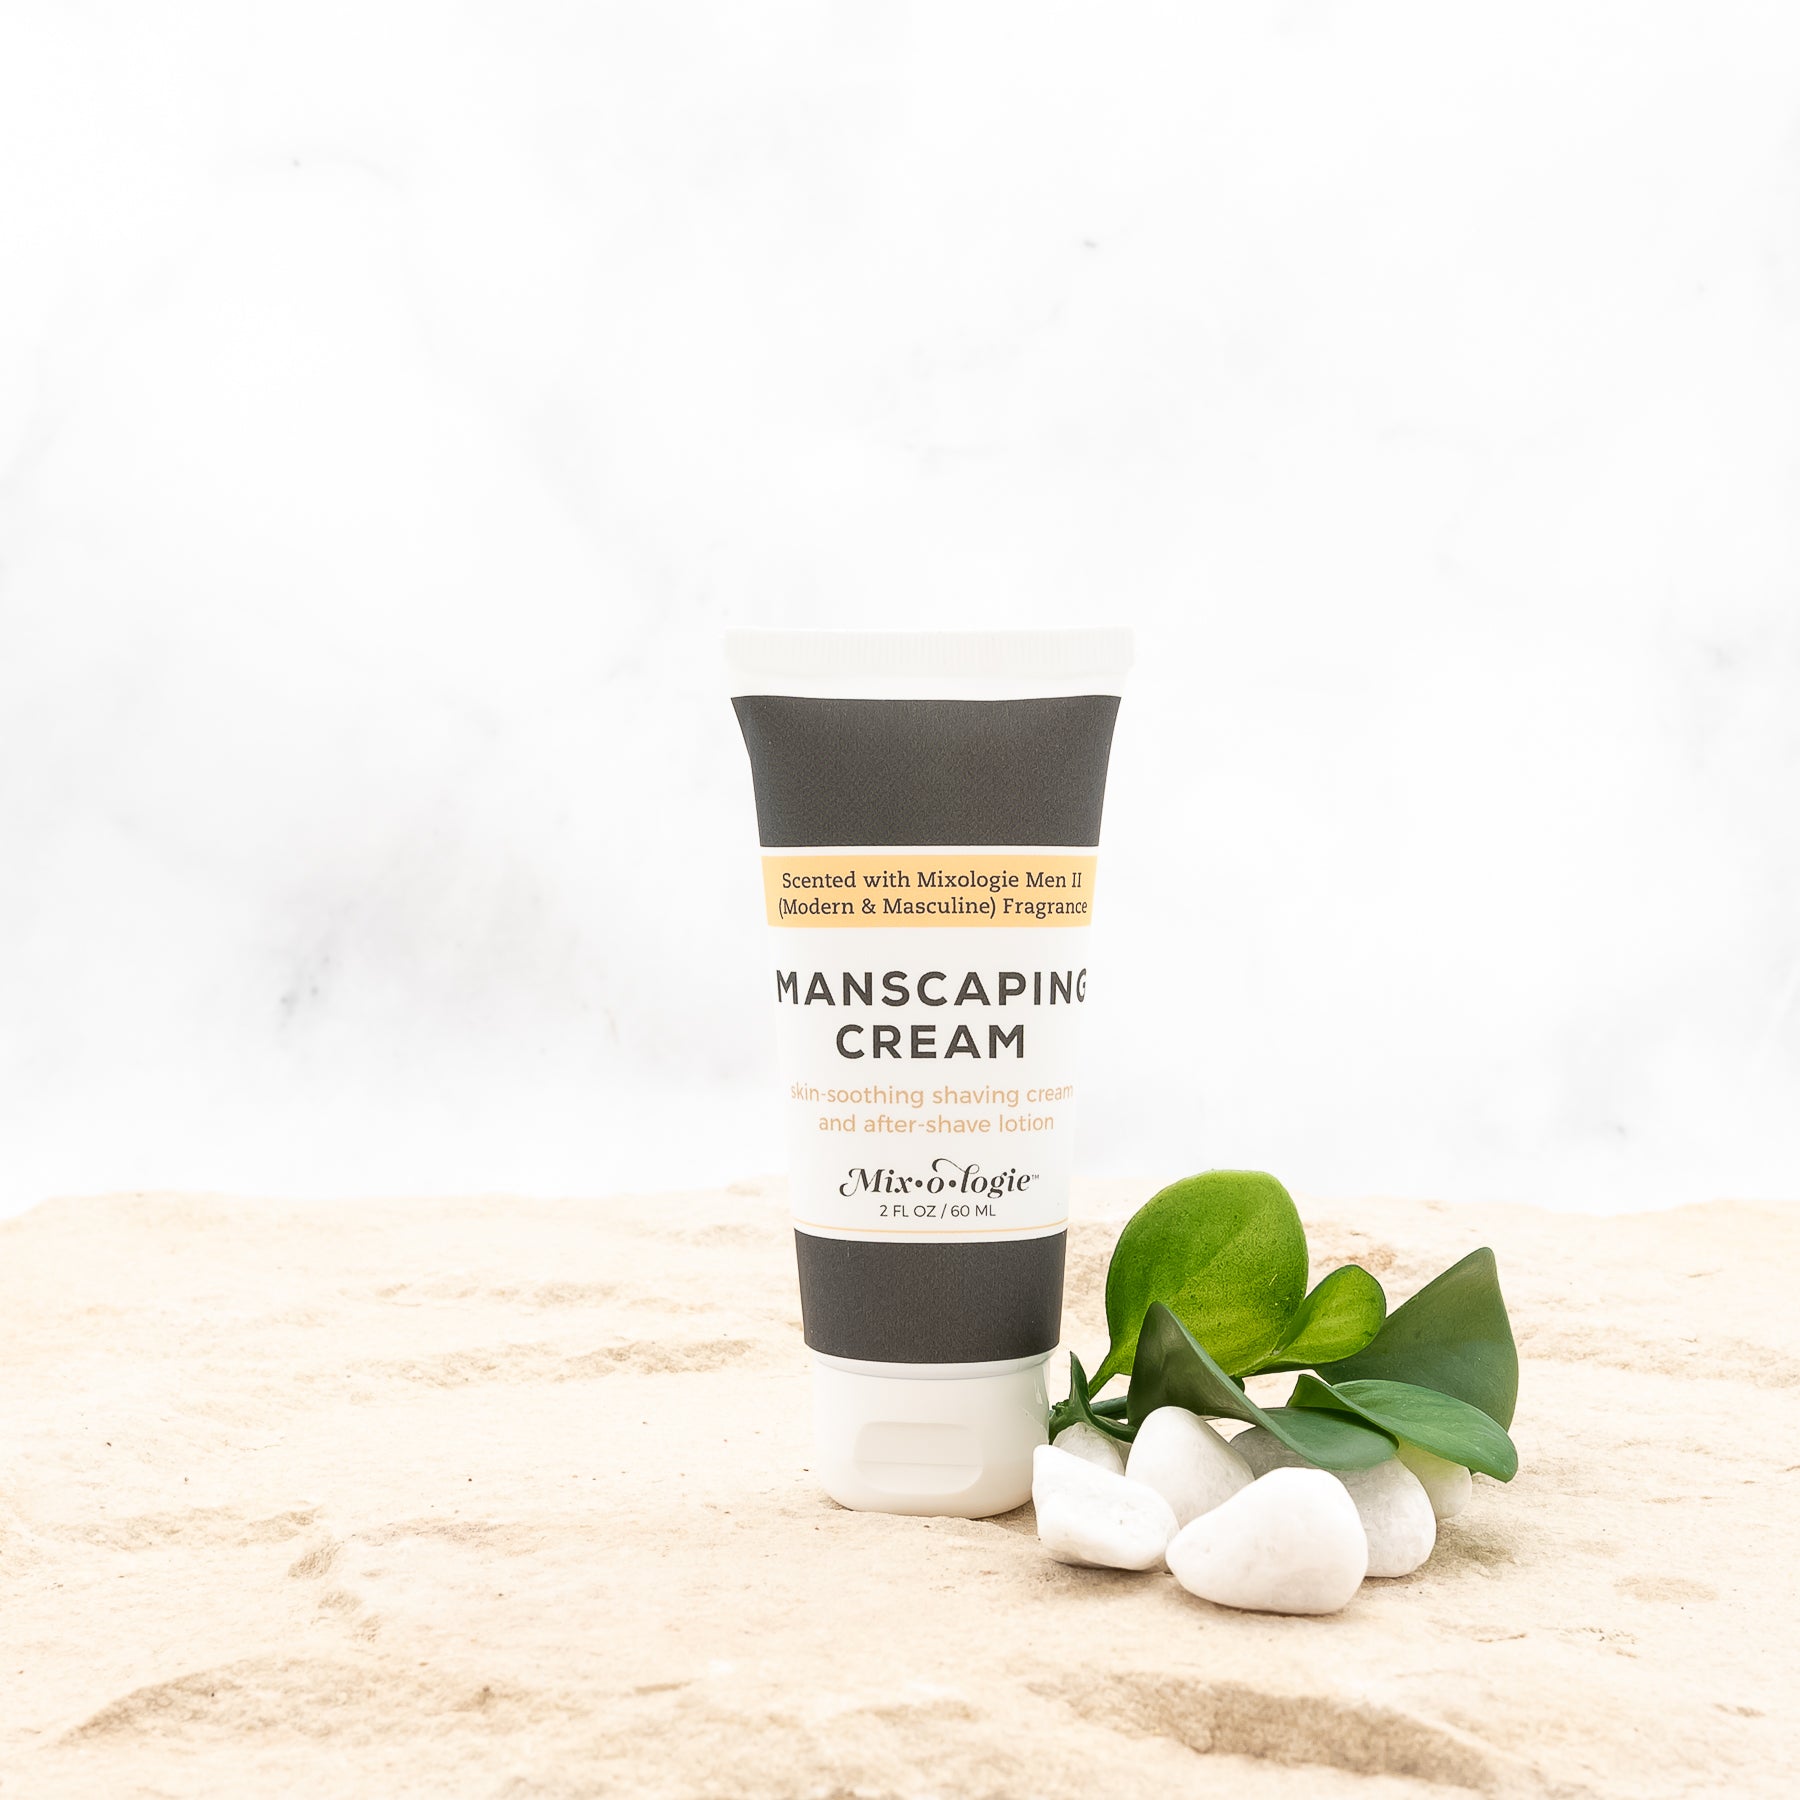 Men’s Manscaping Cream in Men’s II (Modern & Masculine) in a black and white tube with yellow accents. Skin-soothing shaving cream and after-shave lotion. 2 fl oz or 60 mL. Pictured in sand with rocks and greenery.